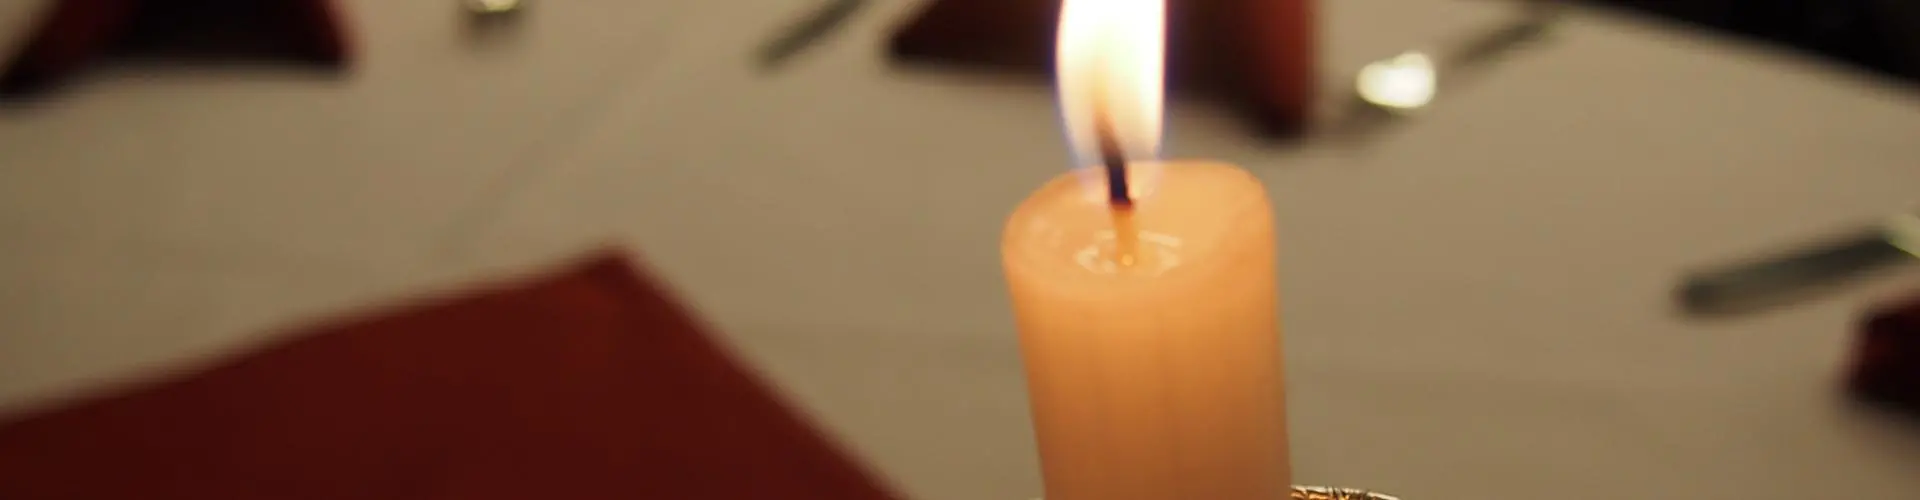 An image of a candle